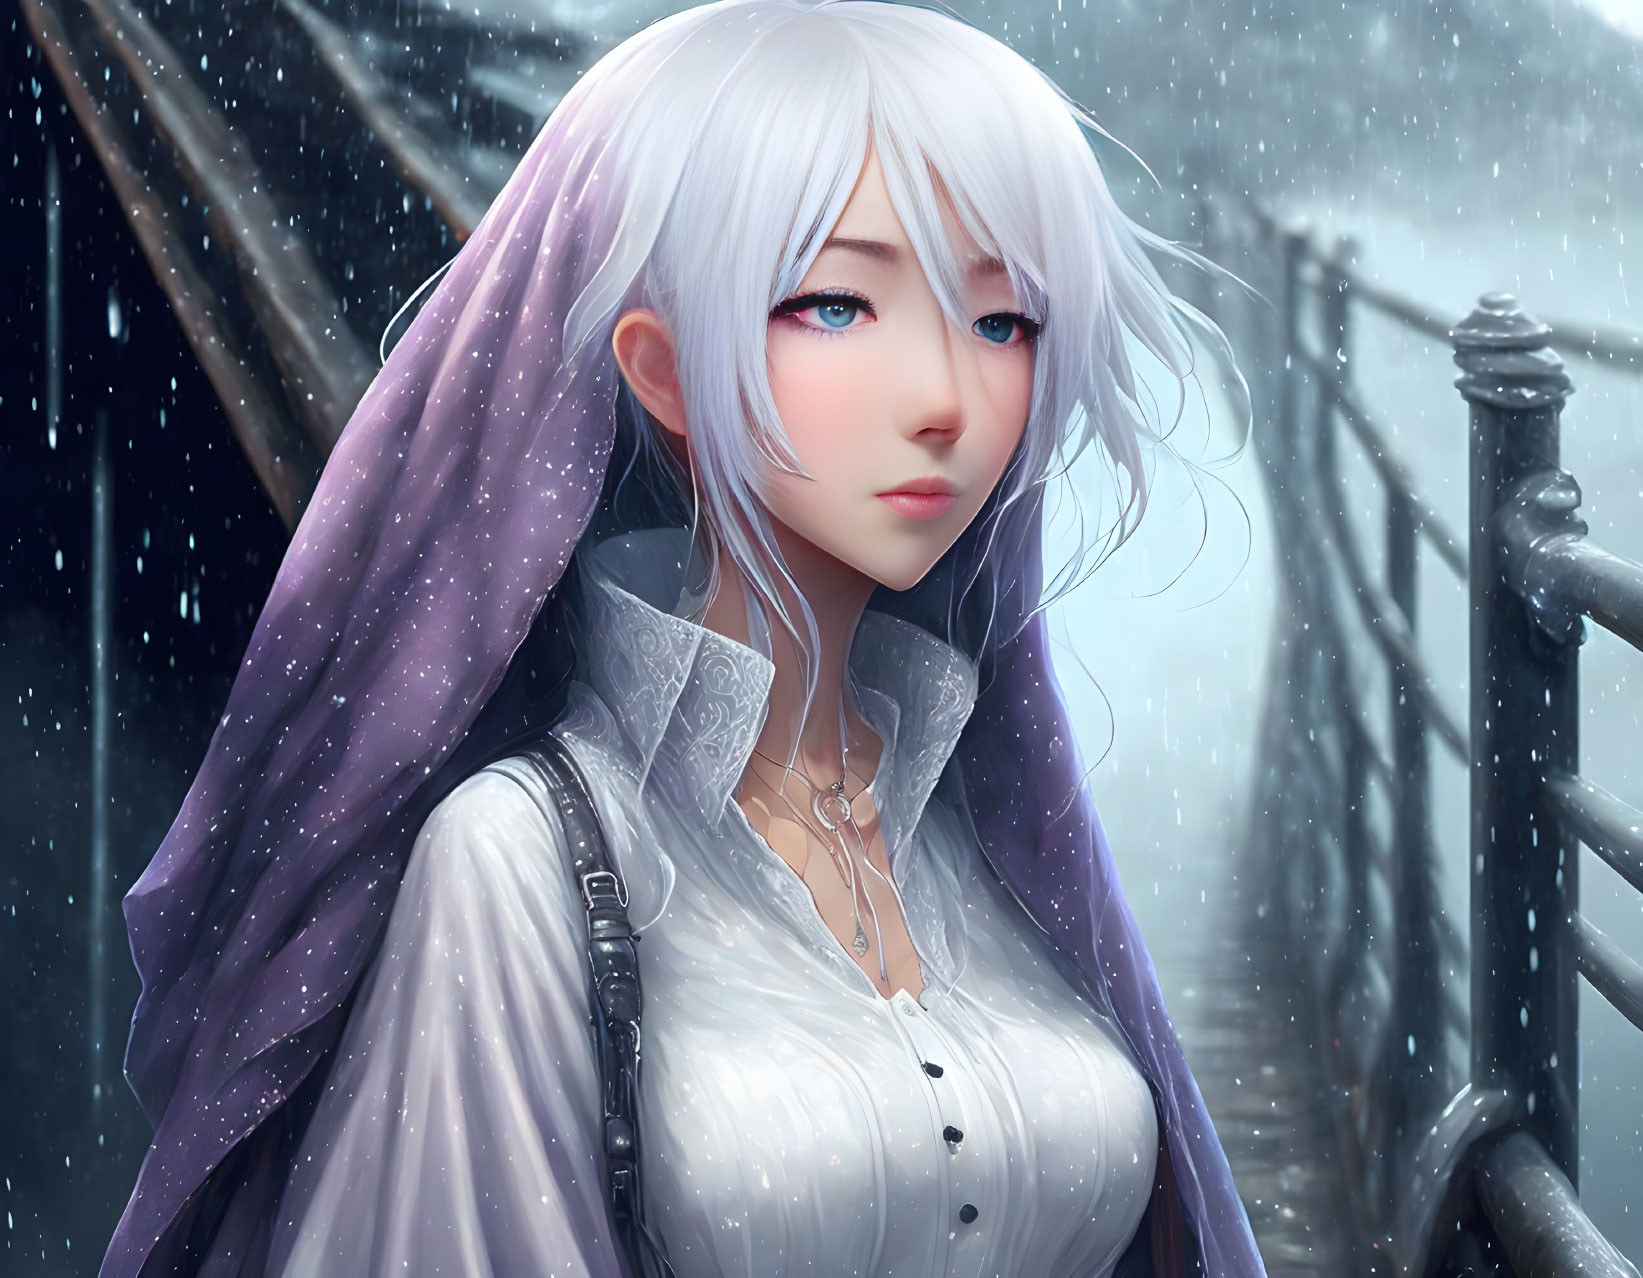 Silver-Haired Female Character in White Blouse and Purple Cloak in Snowy Setting